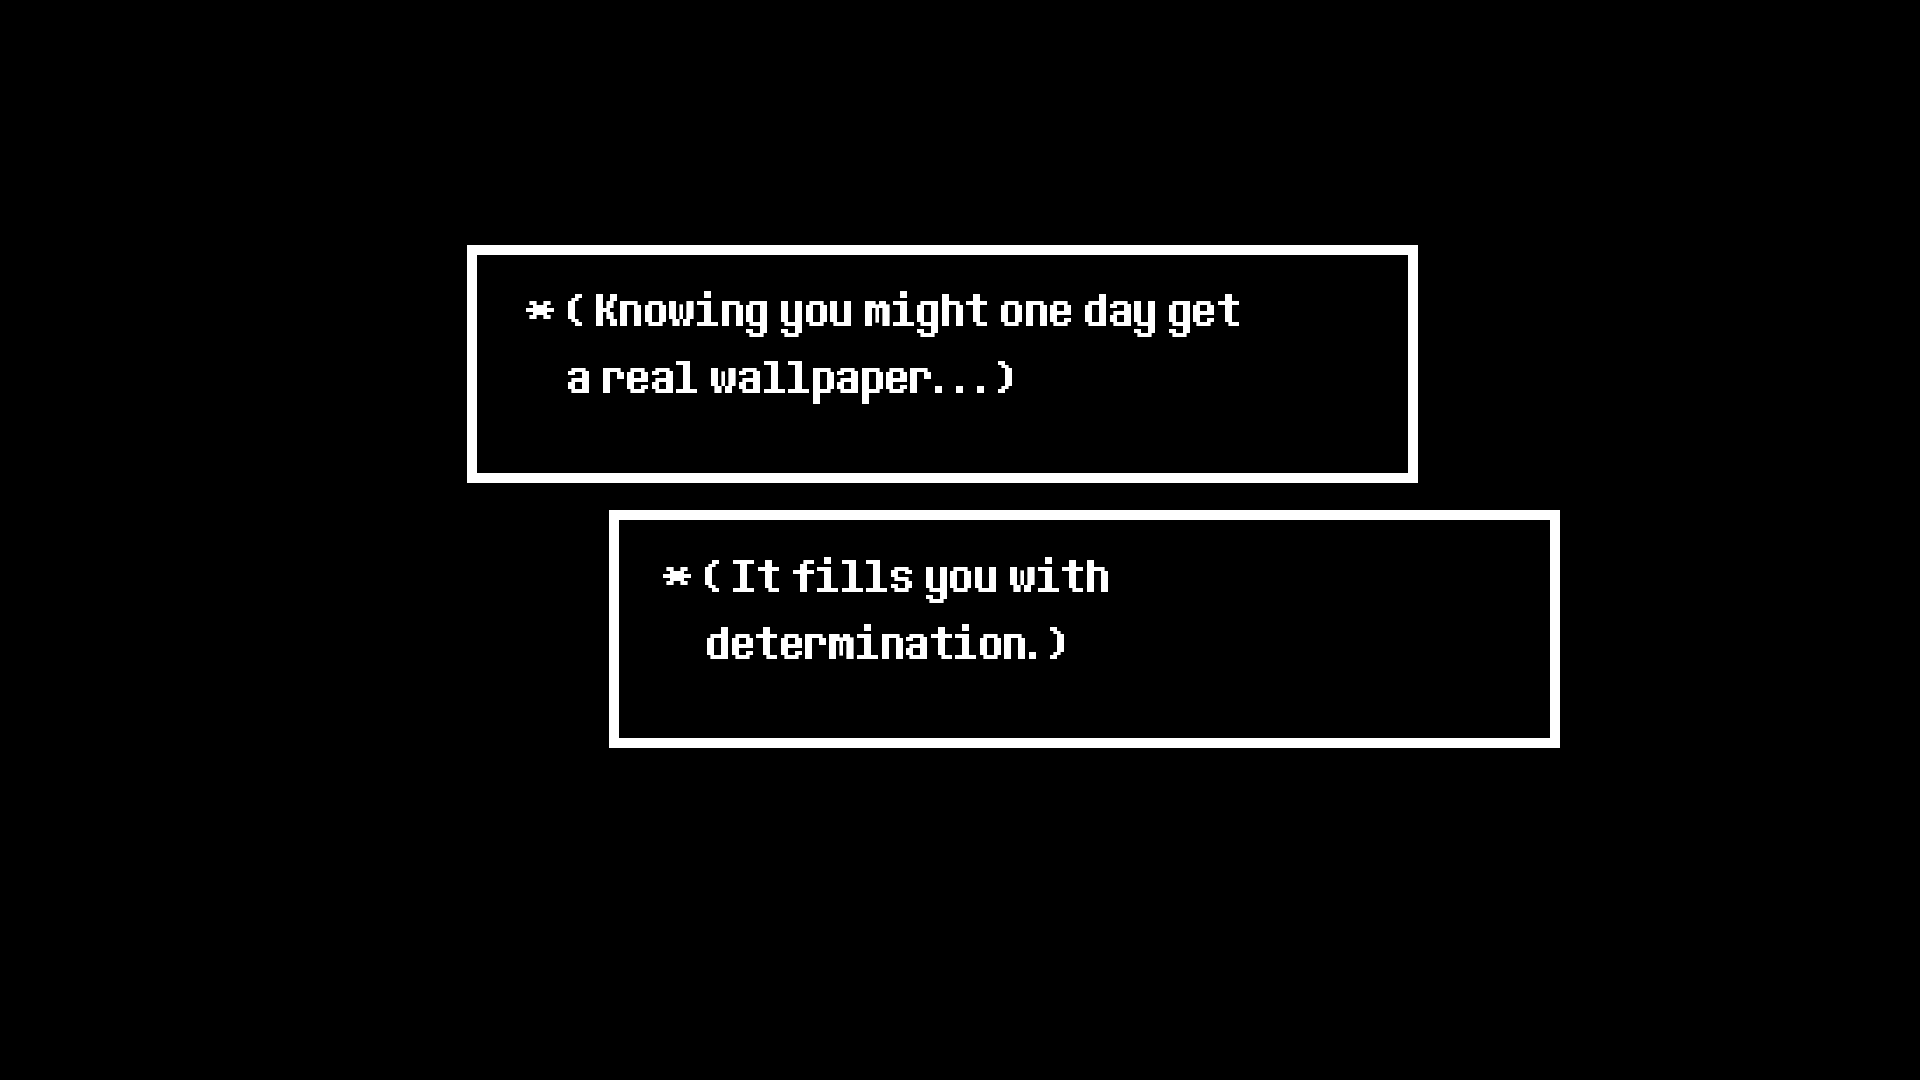 I made a minimalistic Undertale wallpaper. Knowing some of you